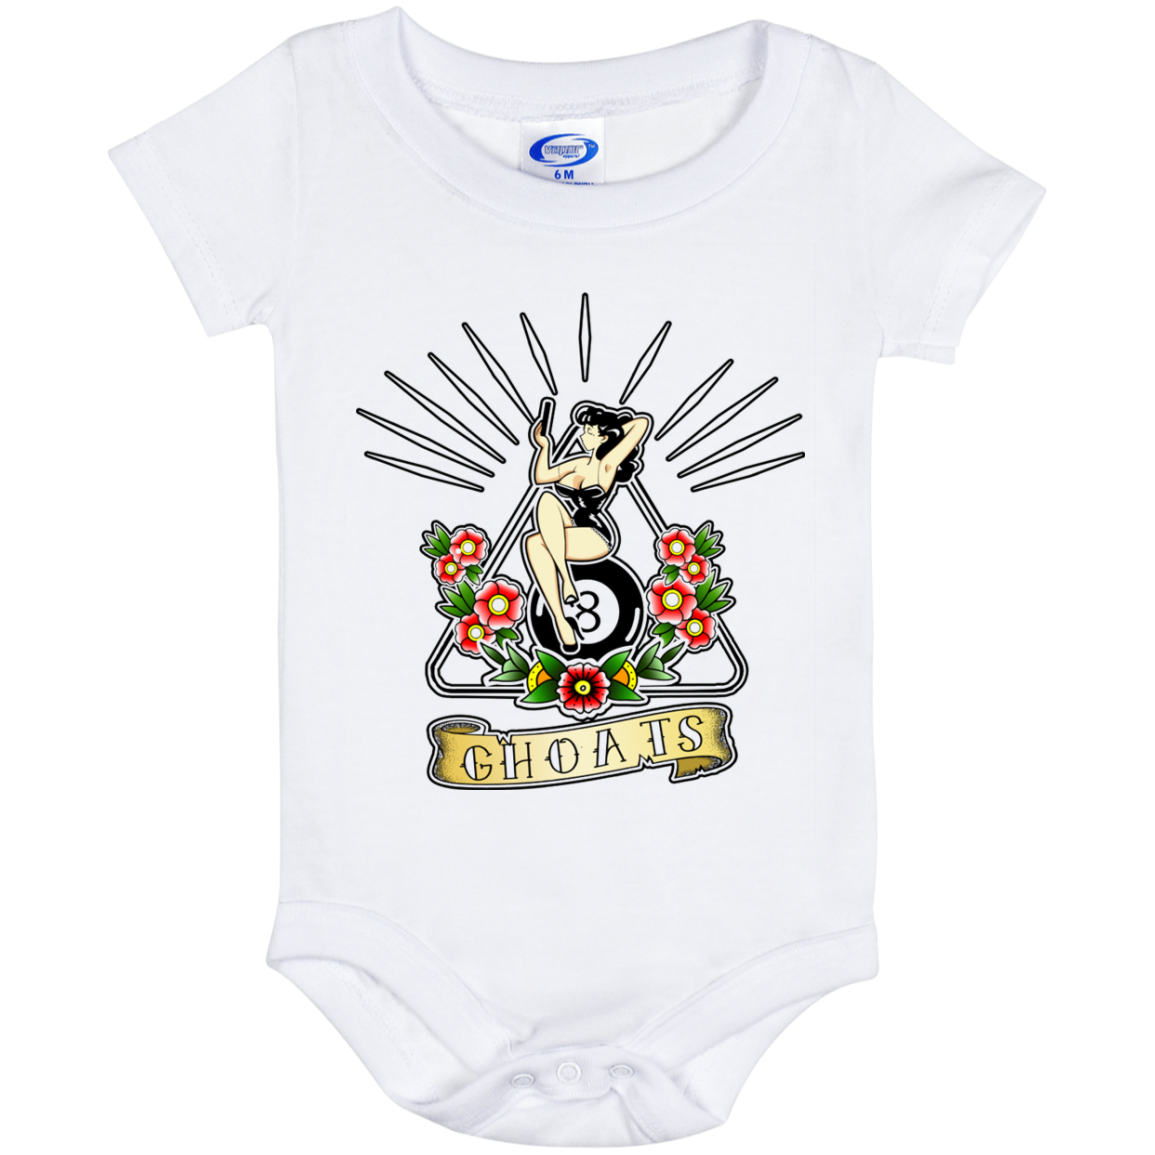 The GHOATS Custom Design. #23 Pin Up Girl. Baby Onesie 6 Month